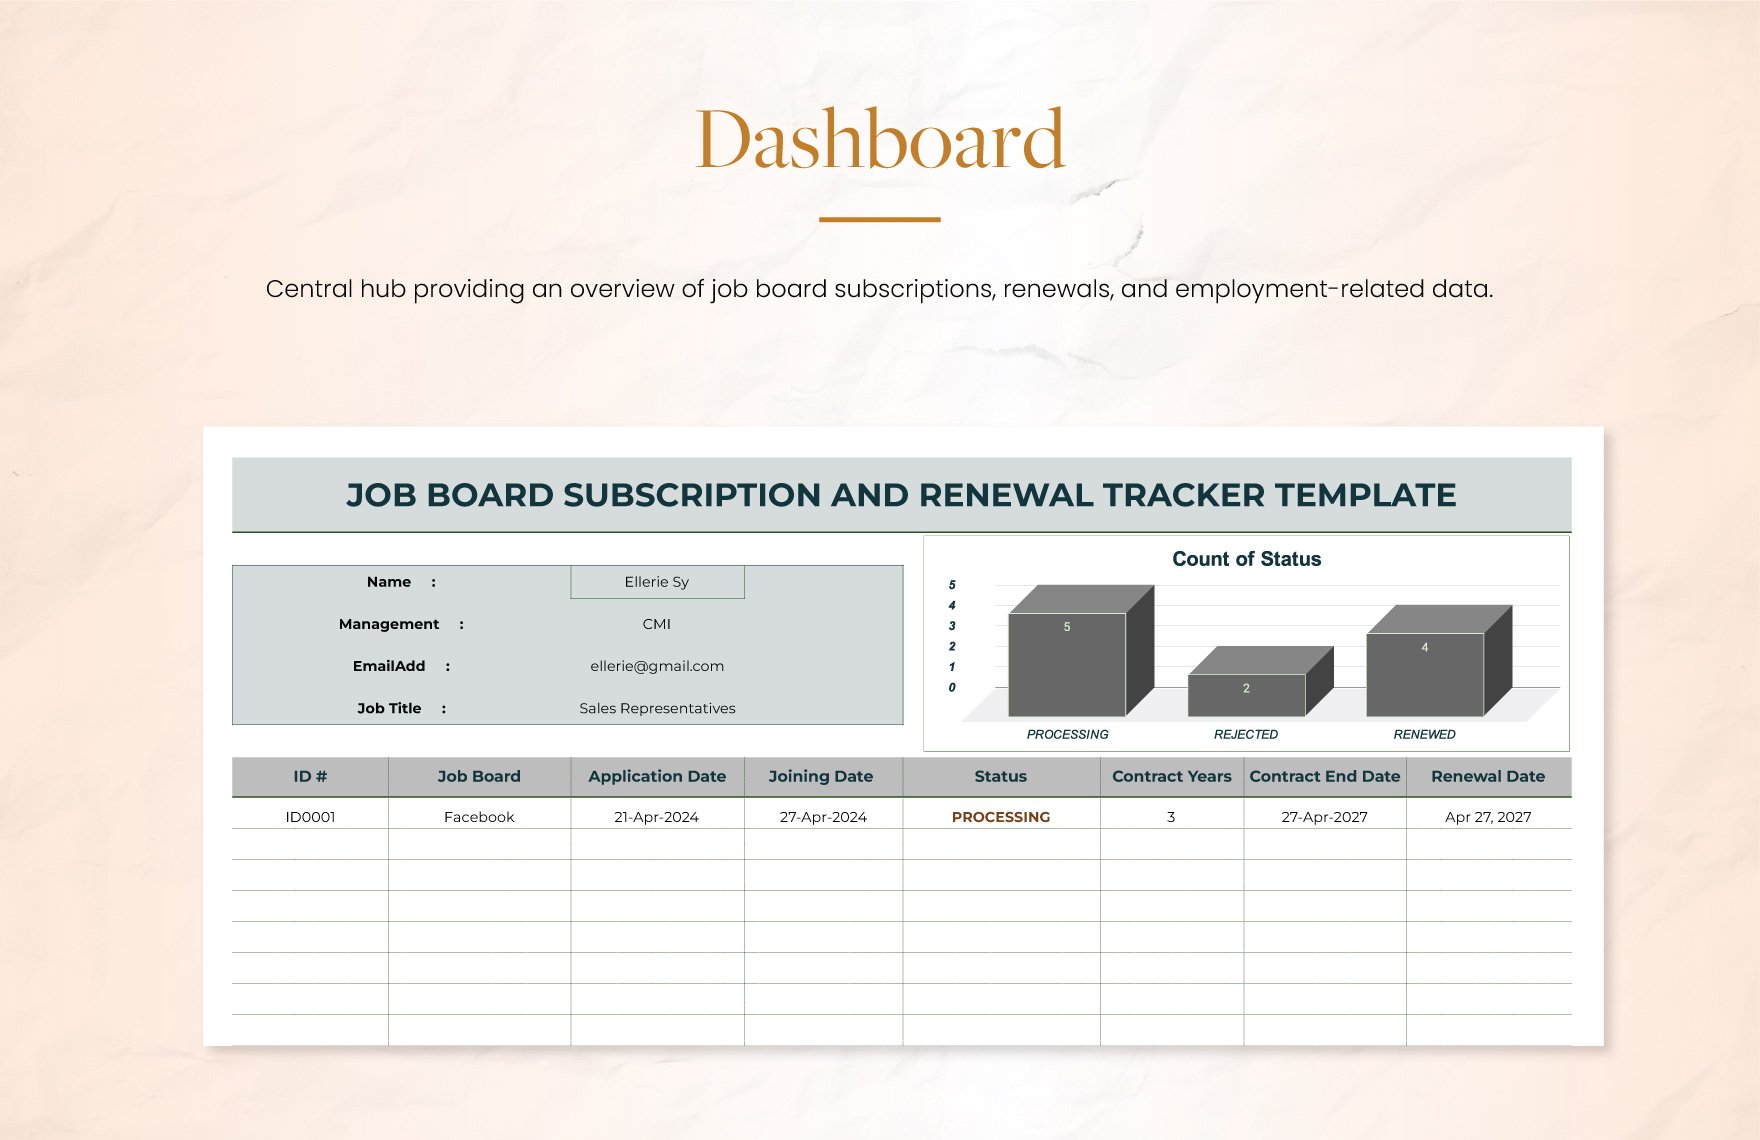 Job Board Subscription and Renewal Tracker HR Template